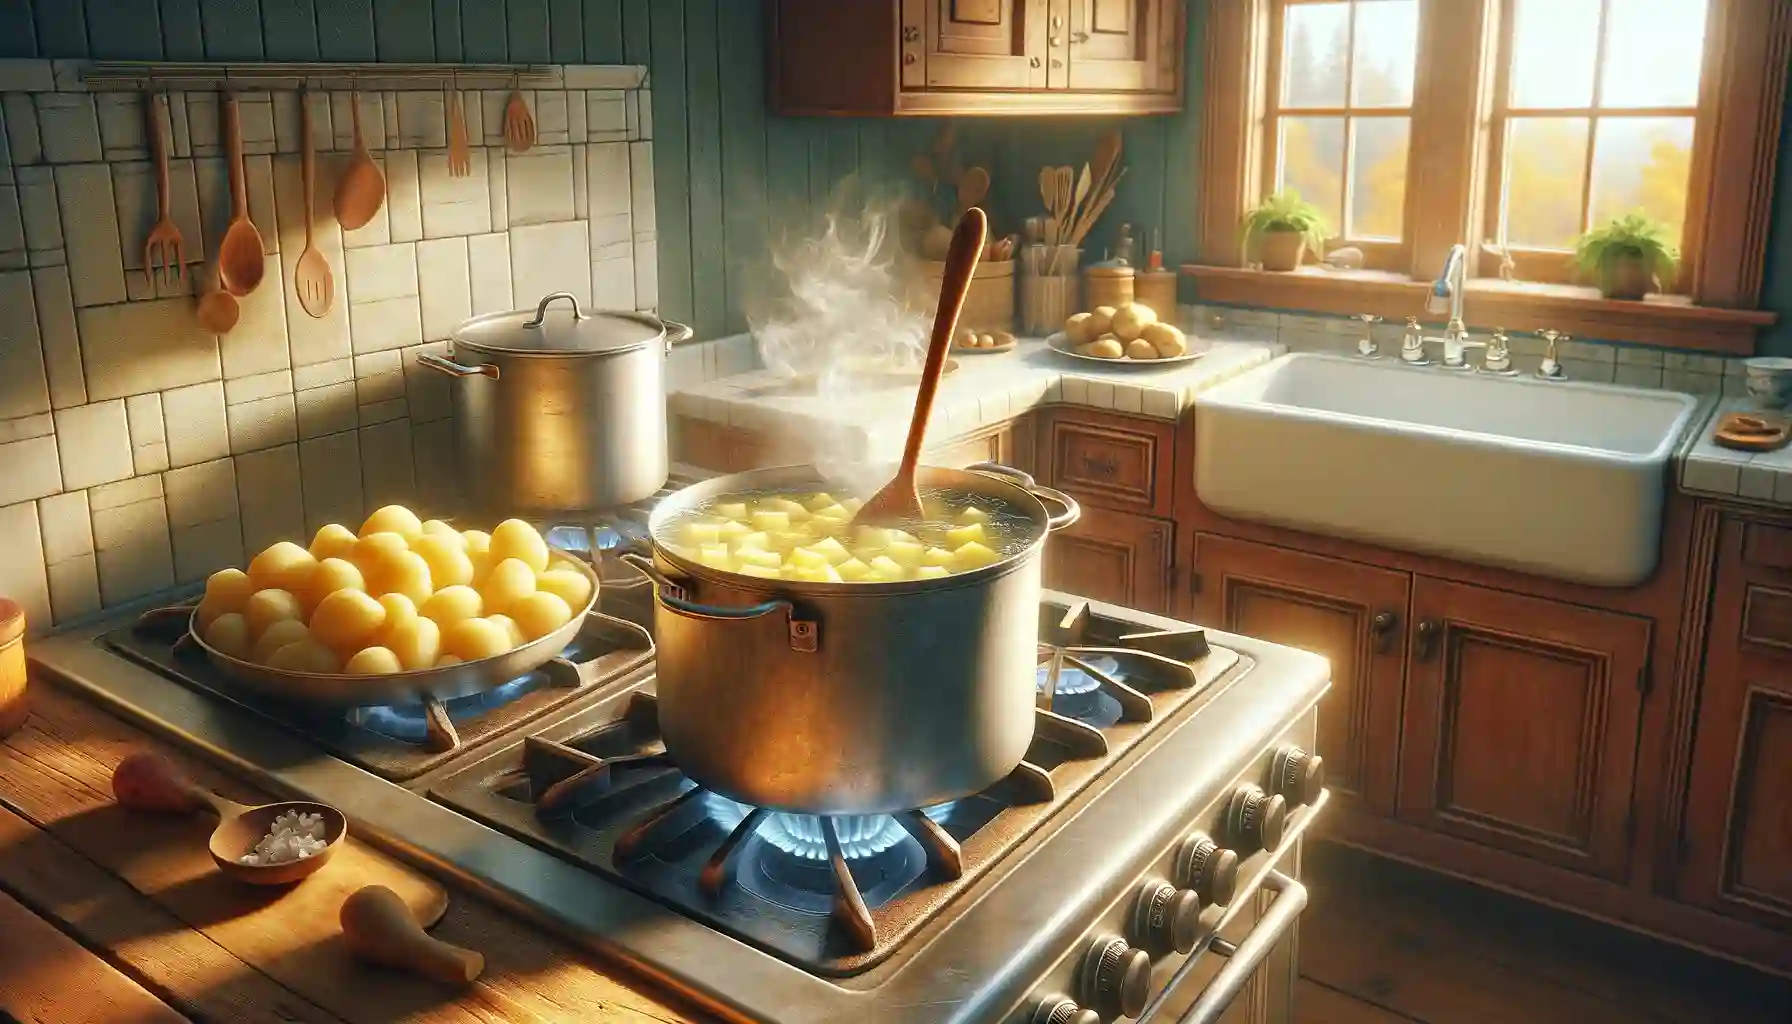 While the filling is simmering, place the peeled and diced potatoes in a pot of cold water. Bring it to a boil, then reduce the heat and simmer for about 10–15 minutes, or until the potatoes are fork-tender.